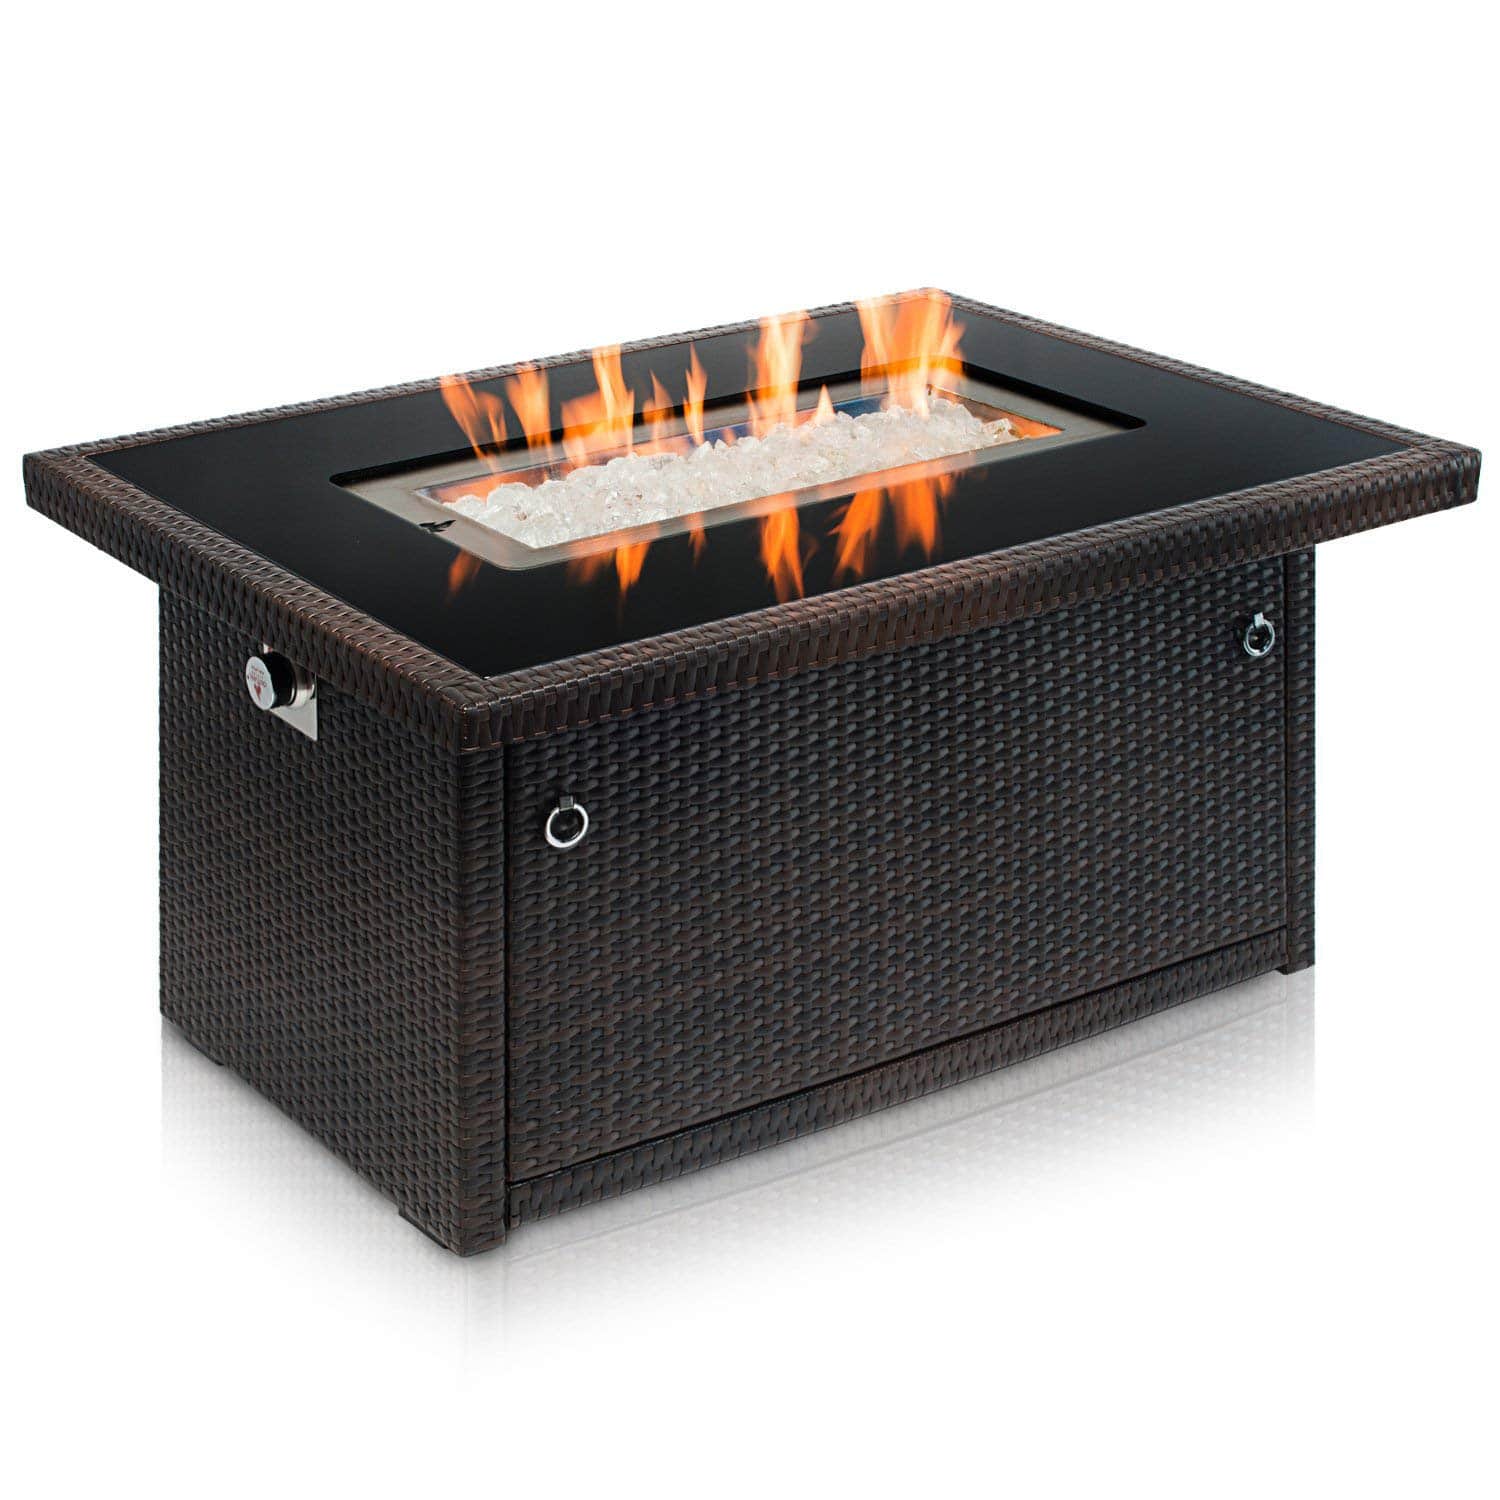 Top 10 Best Outdoor Fire Pits in 2021 Reviews | Buyer’s Guide